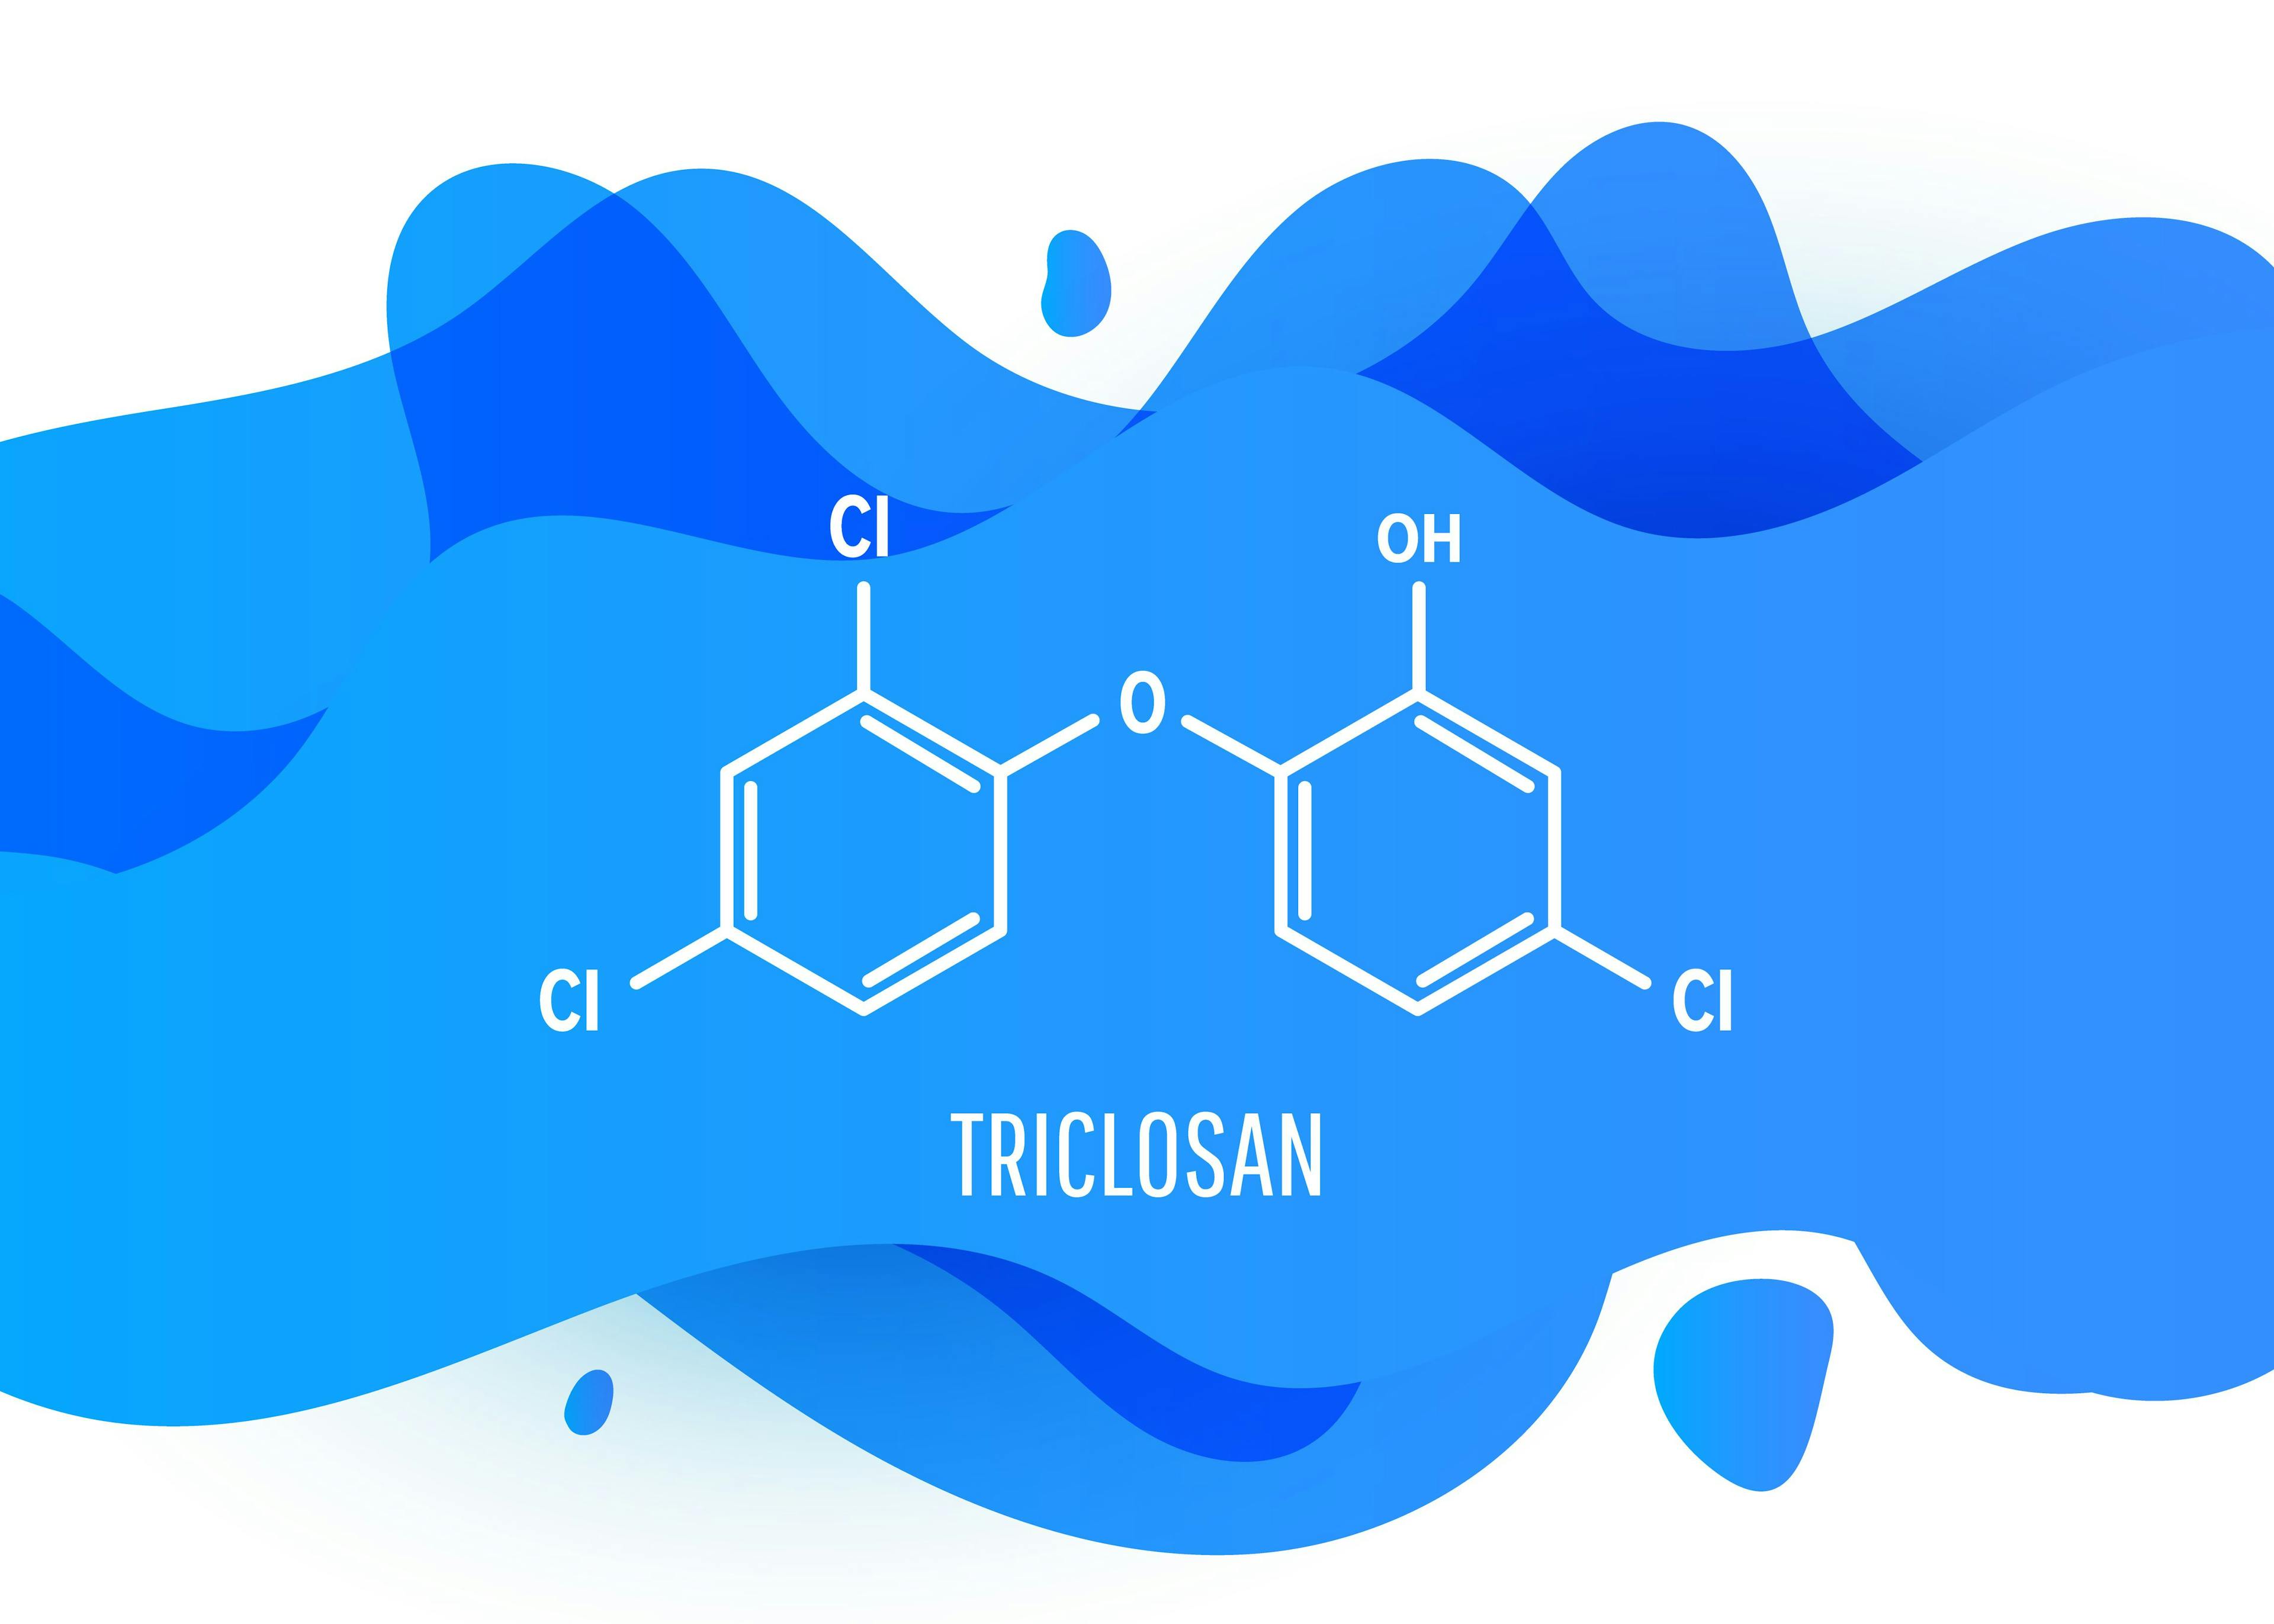 triclosan and the compound